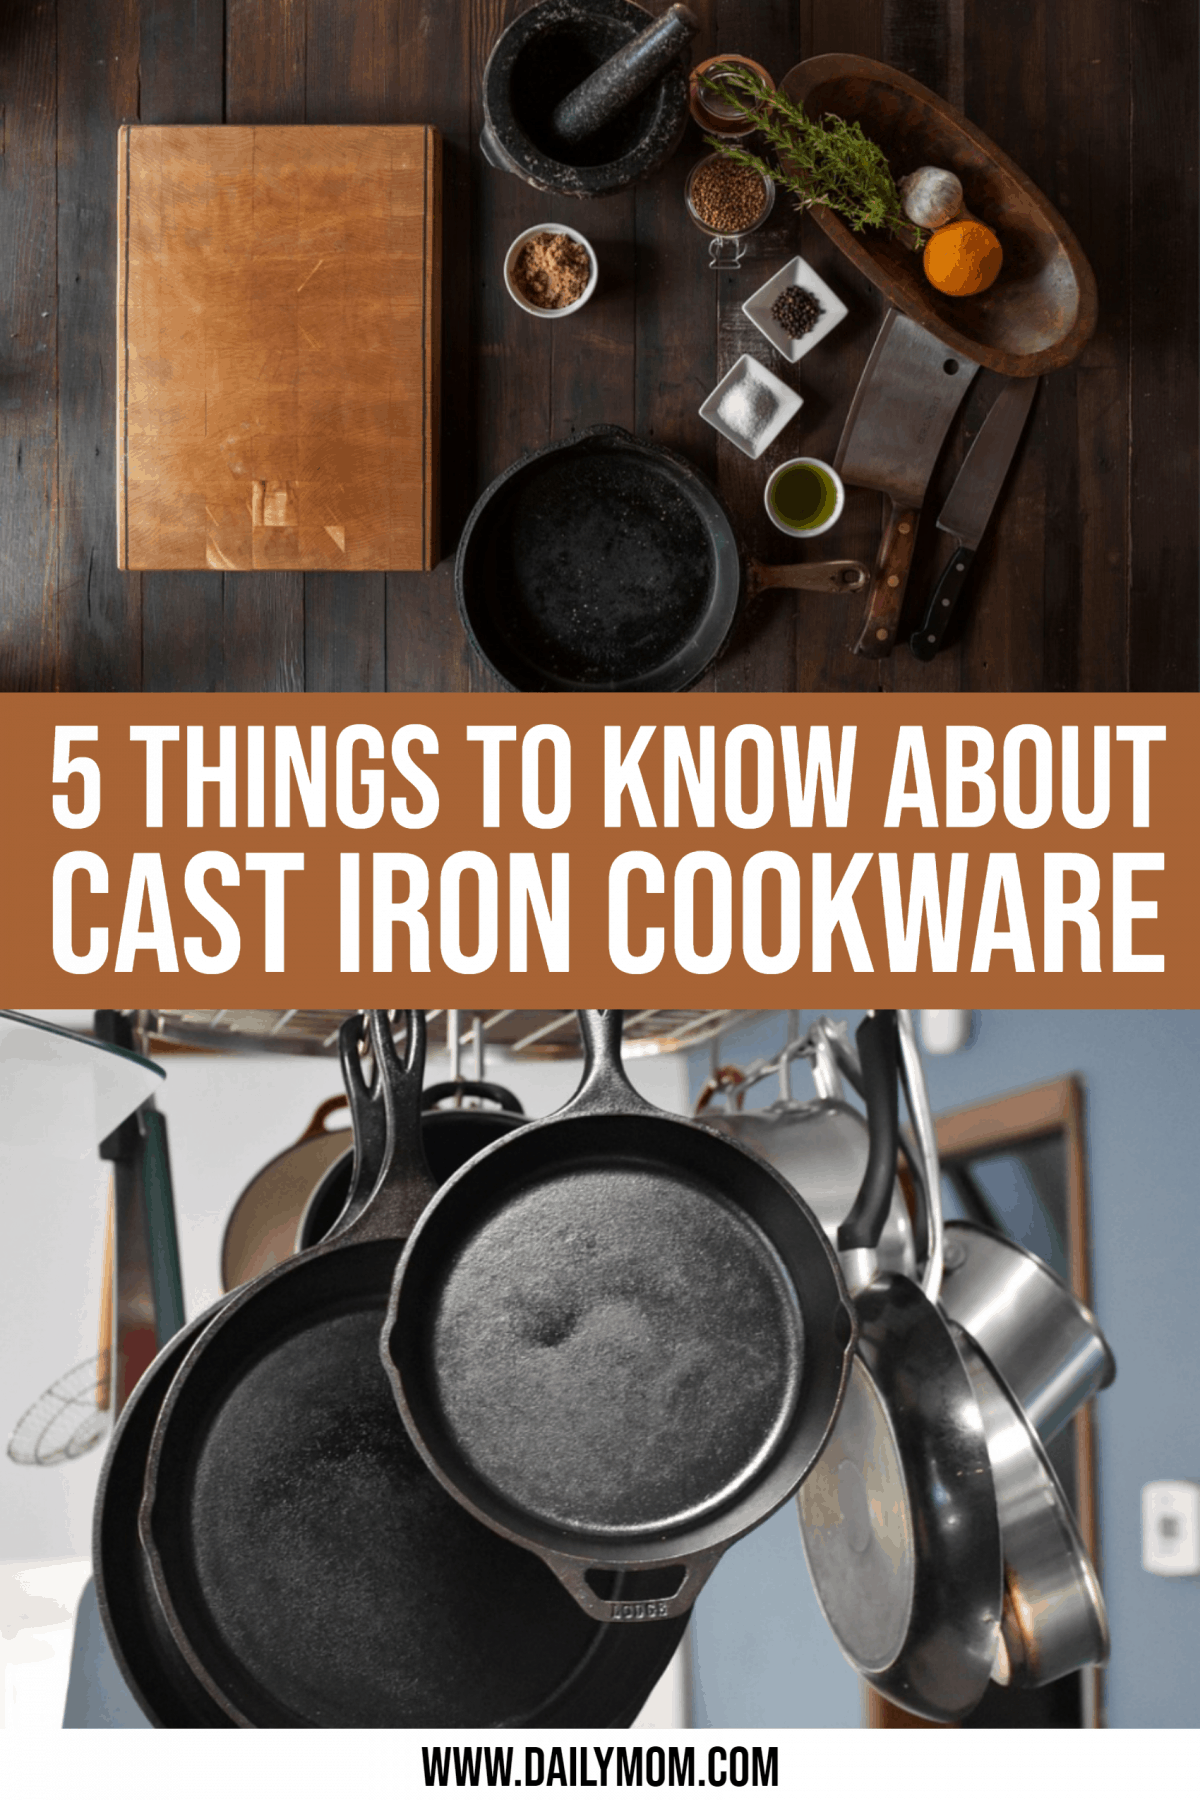 5 Things You Need To Know About Cooking With Cast Iron Cookware